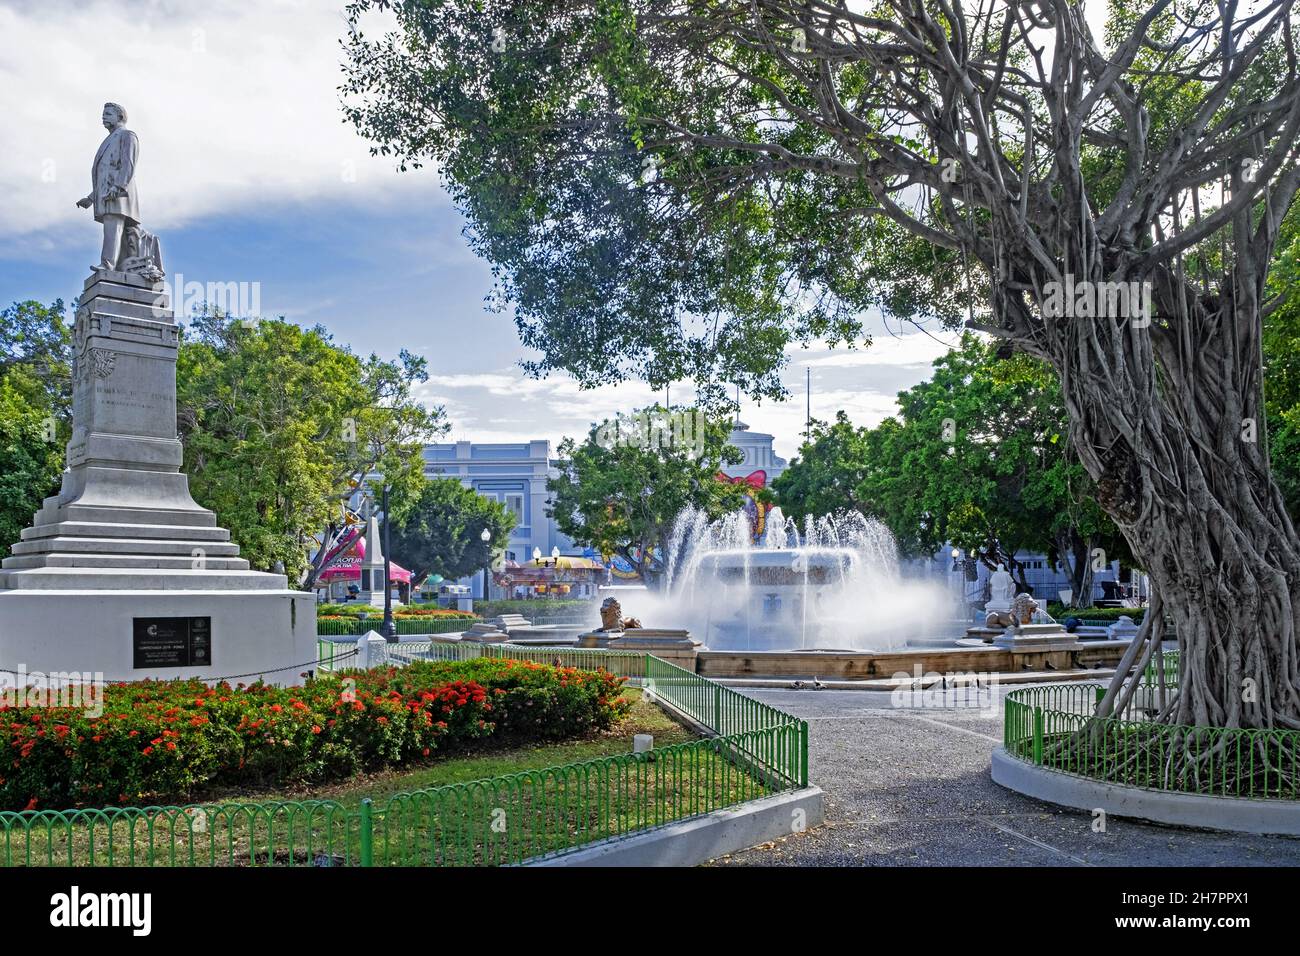 Lions Fountain on Plaza Degetau and statue of Luis Muñoz Rivera on the Plaza Las Delicias in the city Ponce, Puerto Rico, Greater Antilles, Caribbean Stock Photo